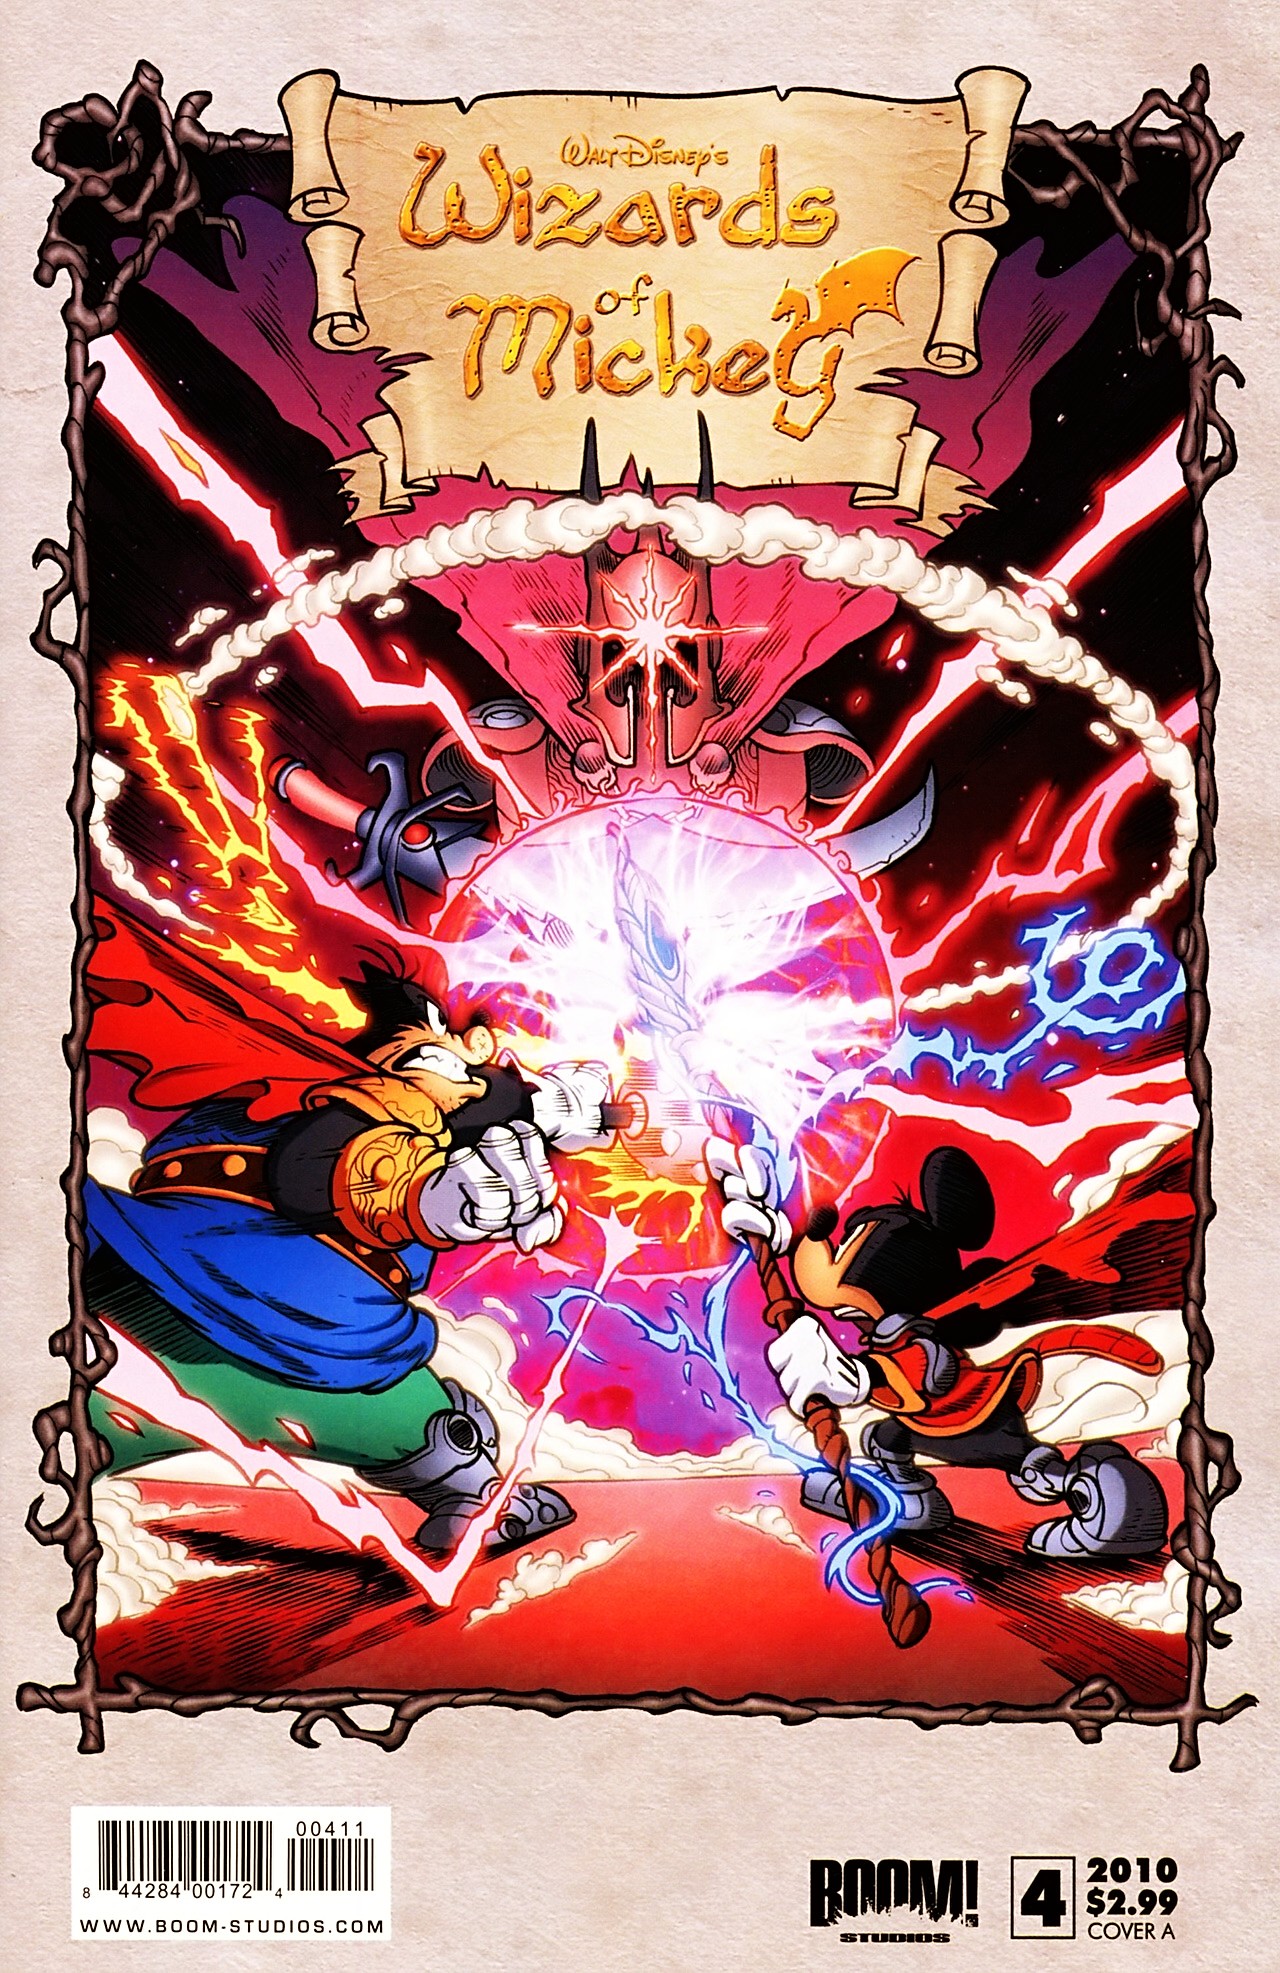 Read online Wizards of Mickey comic -  Issue #4 - 1